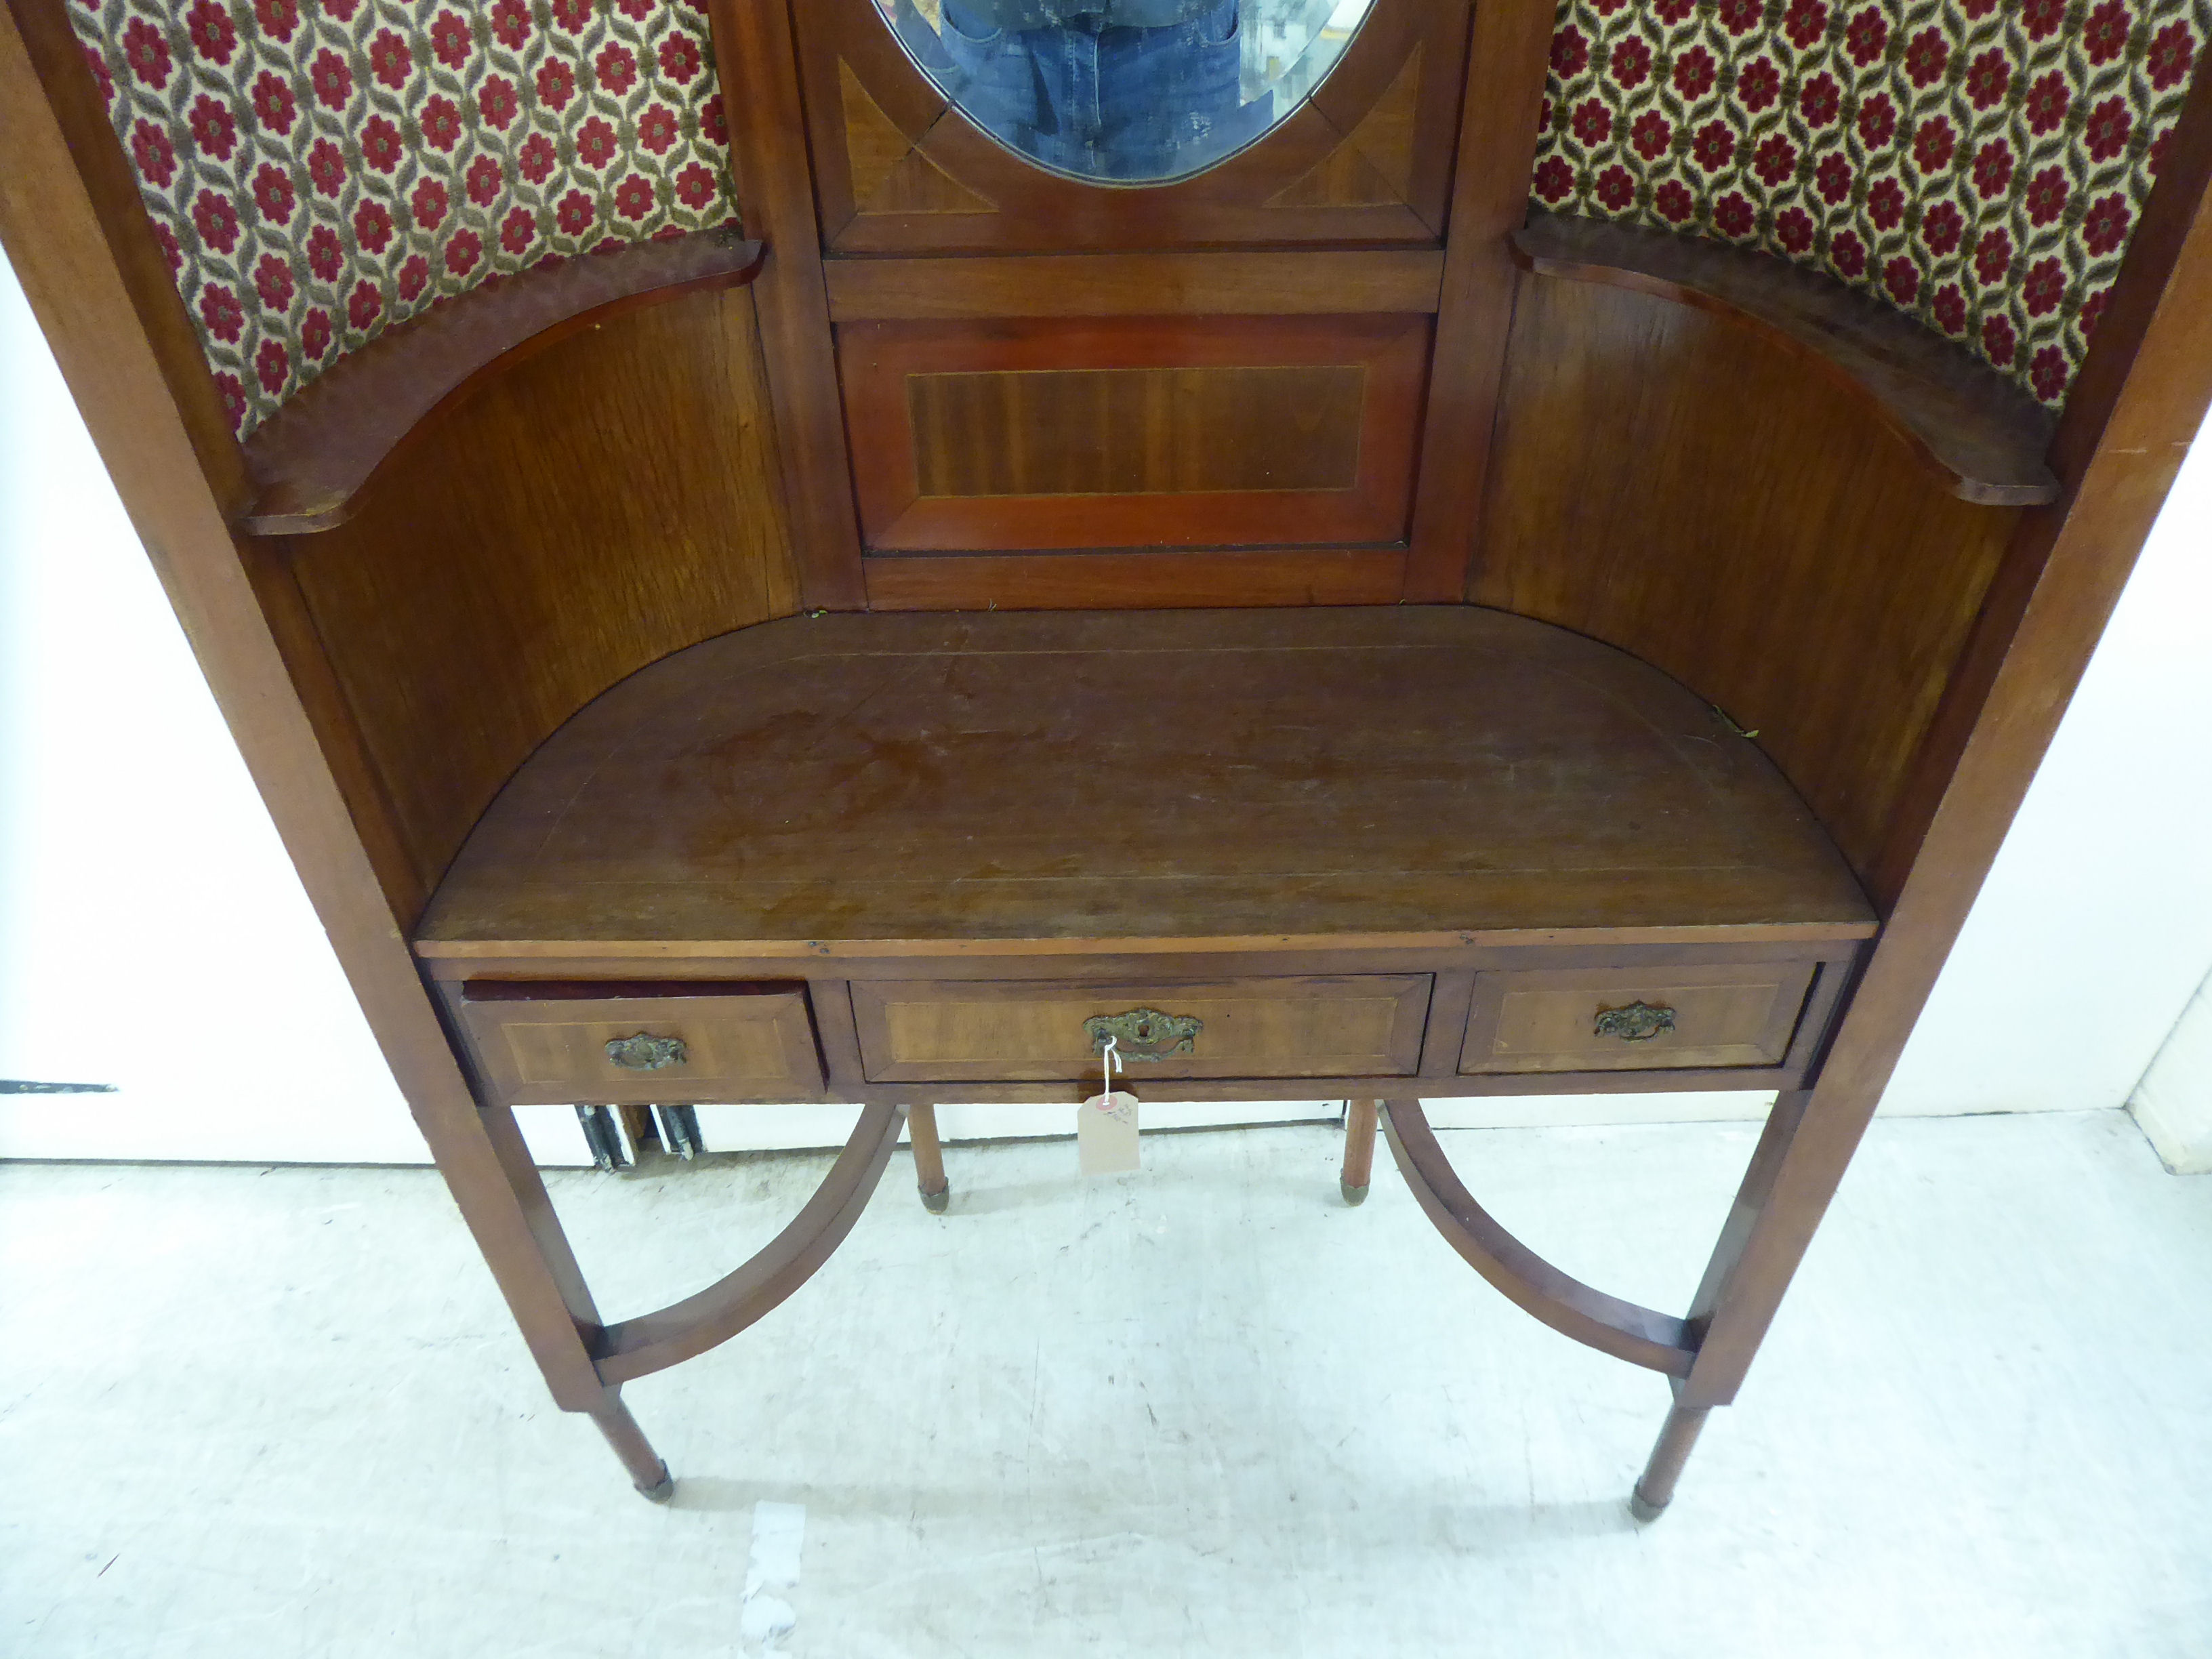 An Edwardian mahogany hallstand of concave form with a mirrored panel, - Image 2 of 3